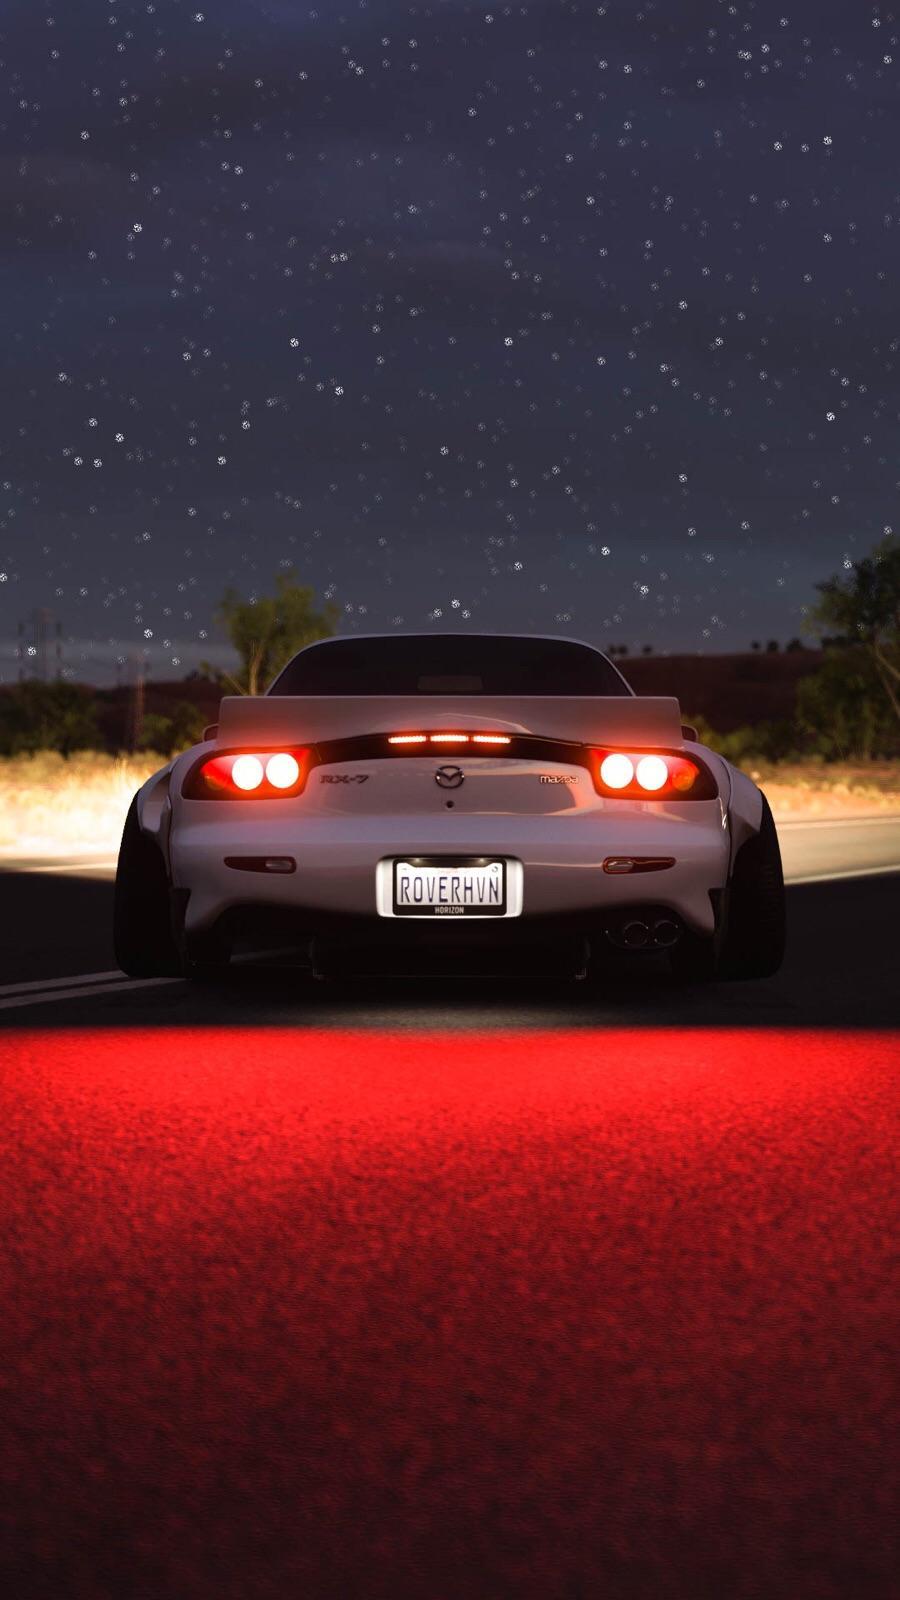 Back To The Future Mazda Rx7 Moon Digital Art 4k S iPhone Wallpapers  Free Download